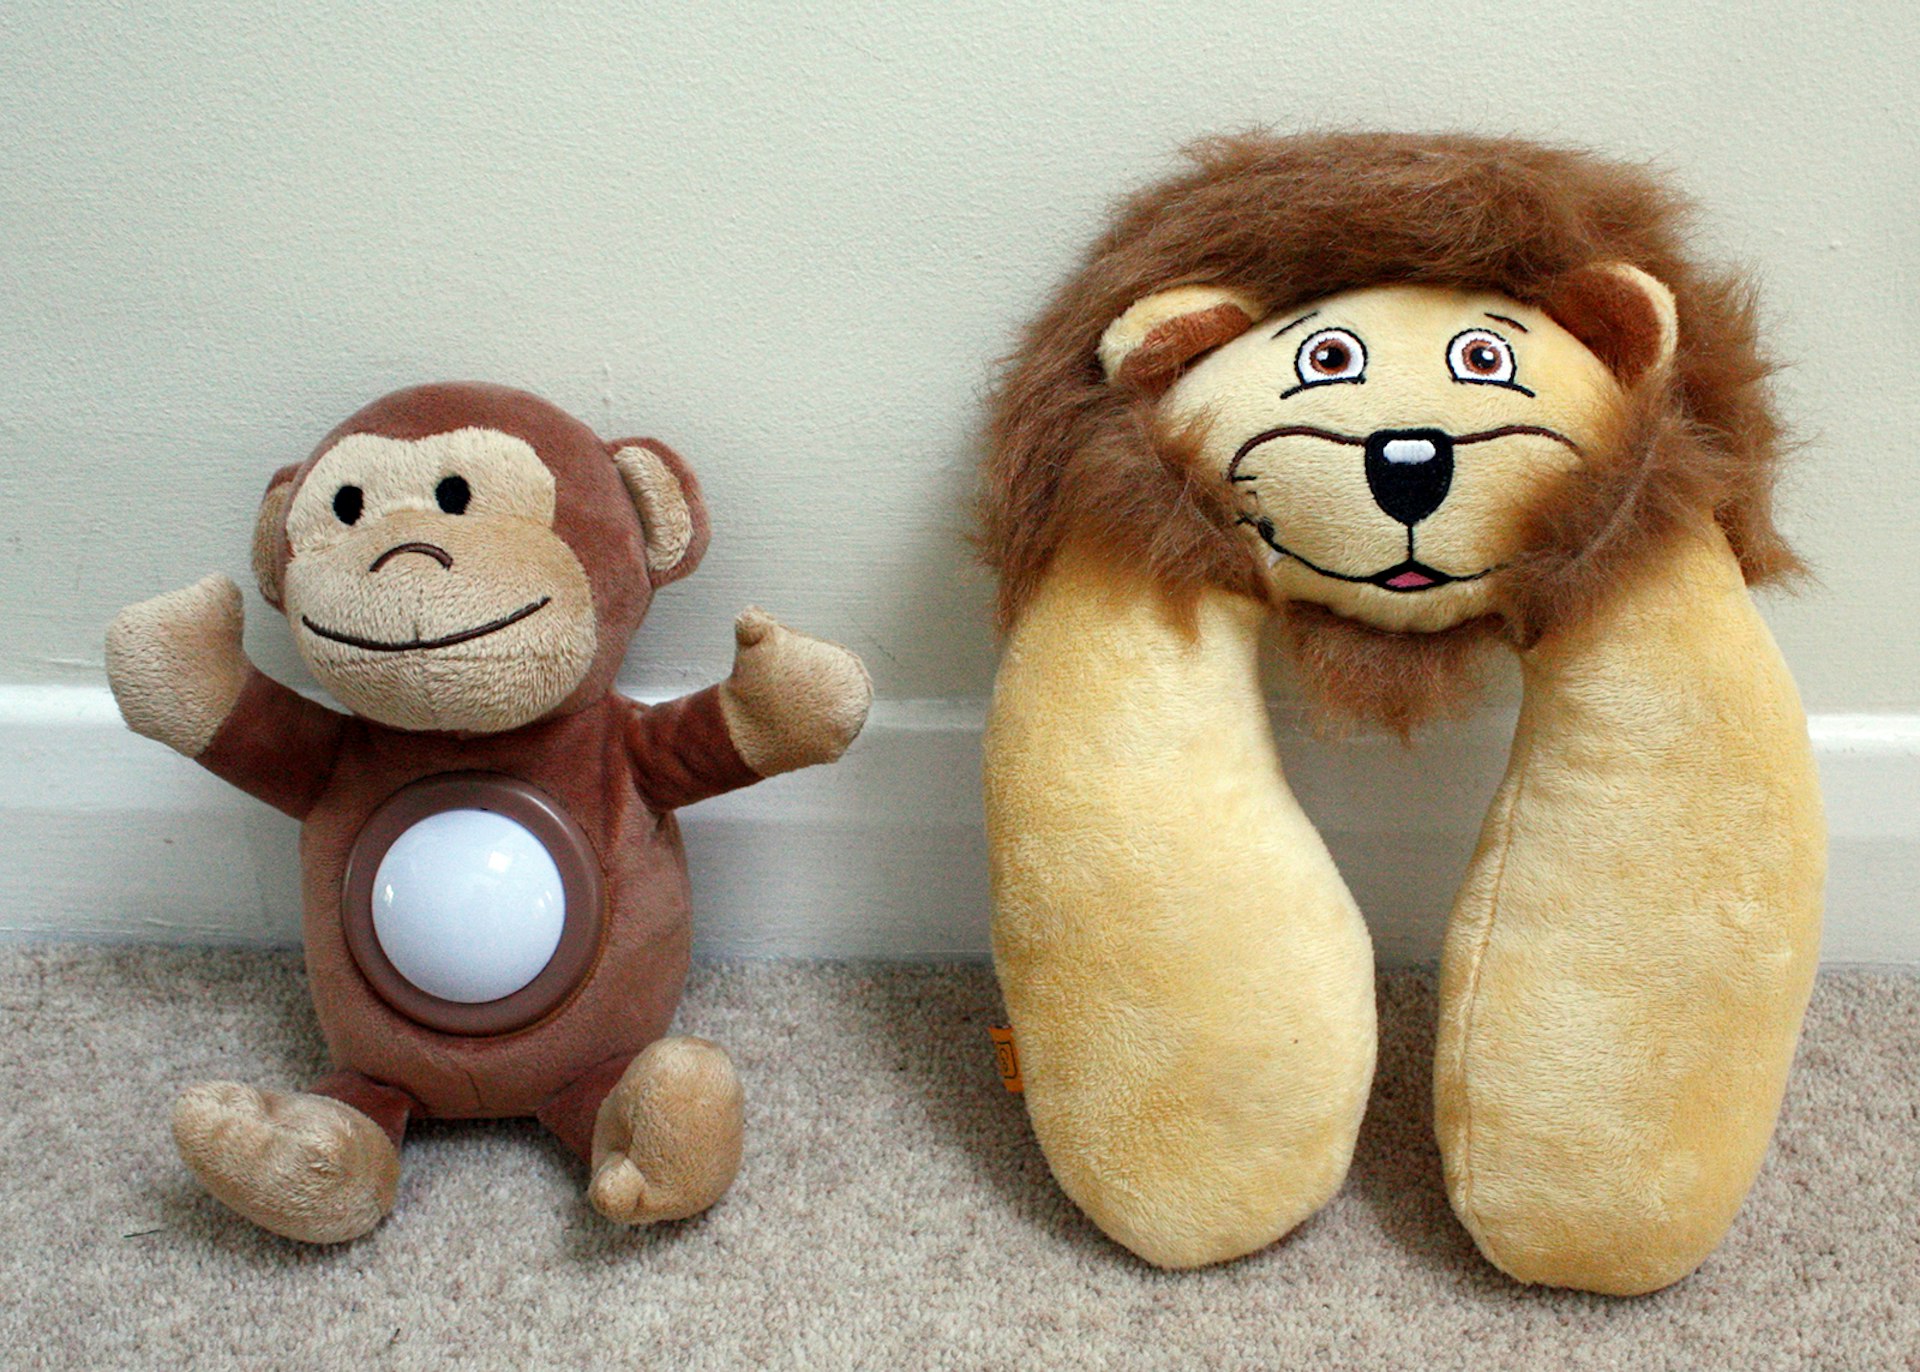 Lion and Monkey from Go Travel © David Else / Lonely Planet